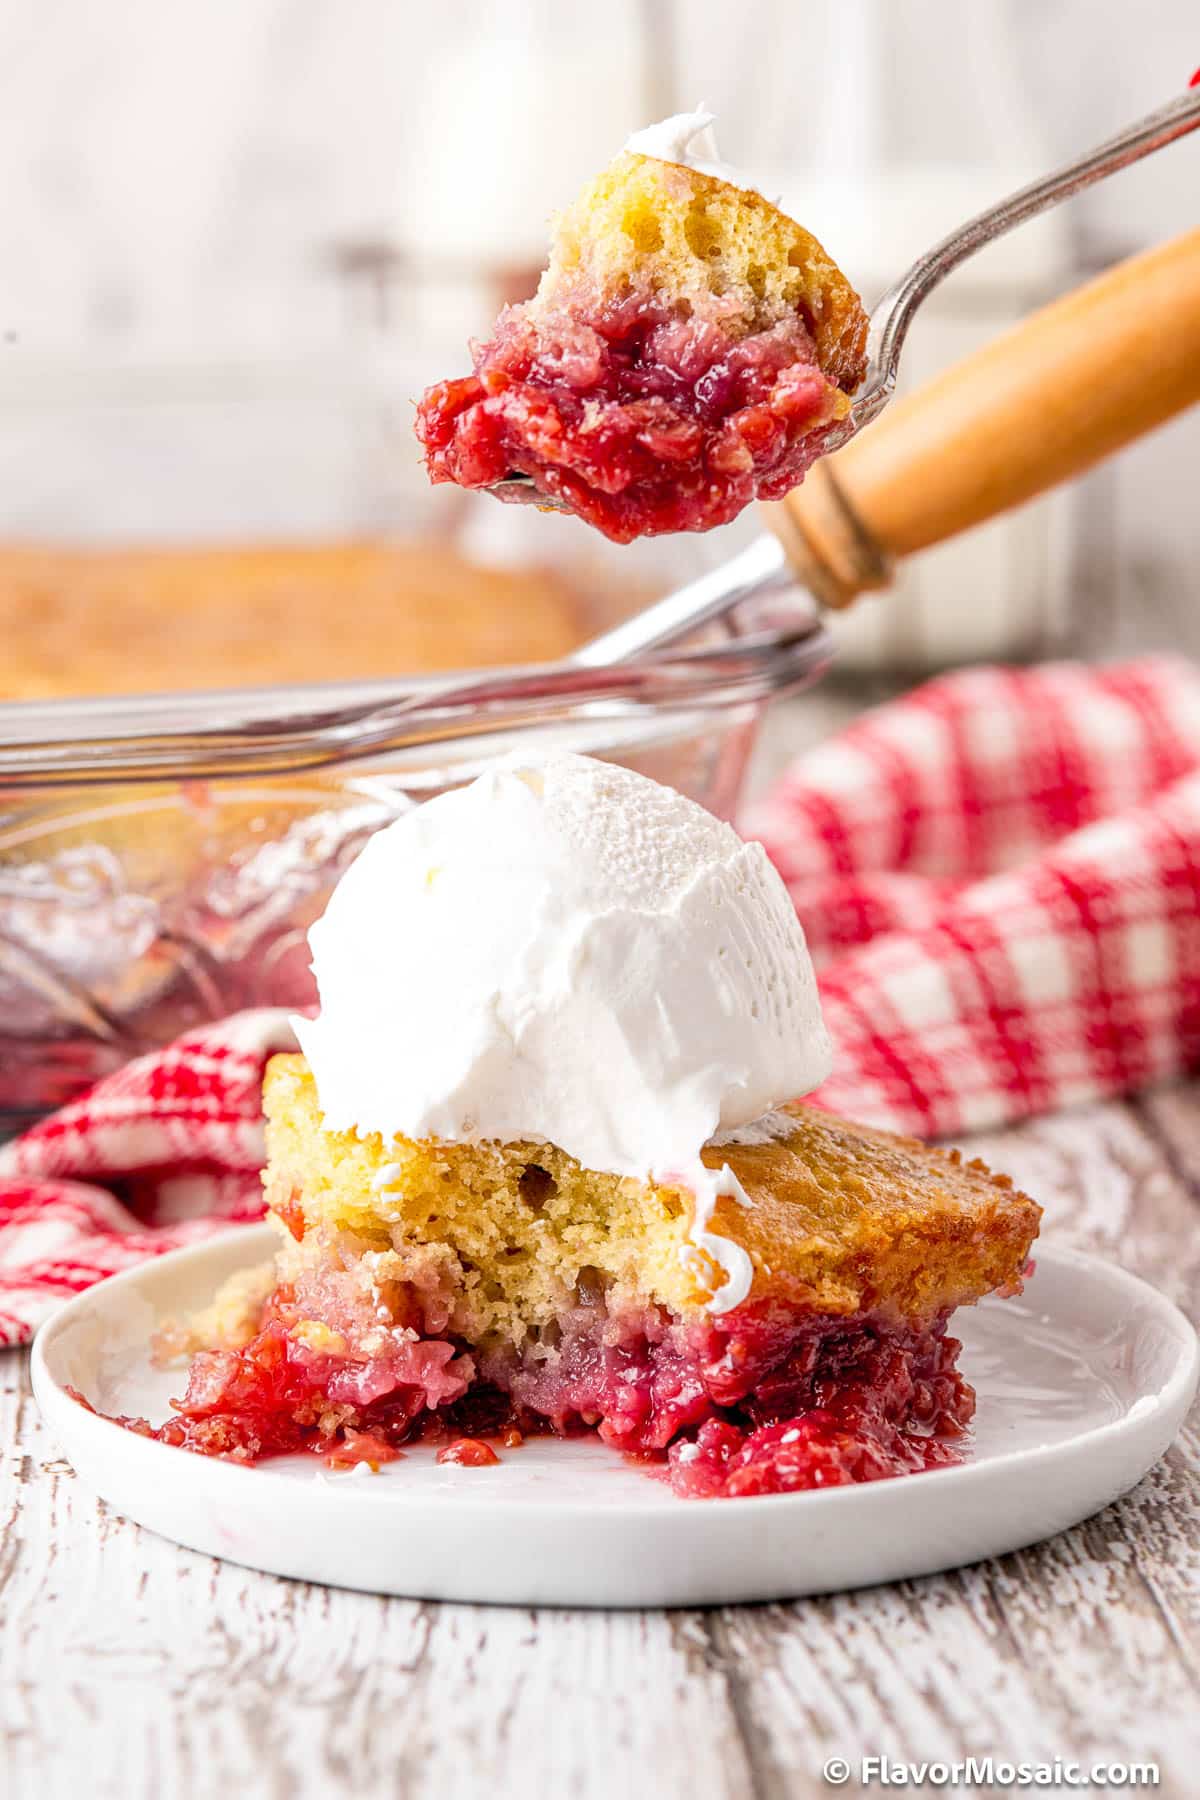 A side view of a white dessert plate with a single serving of raspberry cobbler on it with vanilla ice cream on top that has had a bite taken out of it, and a spoon with a bite of the raspberry cobbler is held above the rest of the serving. In the background is the rest of the cobbler (blurred) in a glass baking dish with a red and white checkered napkin to the right of the dish.